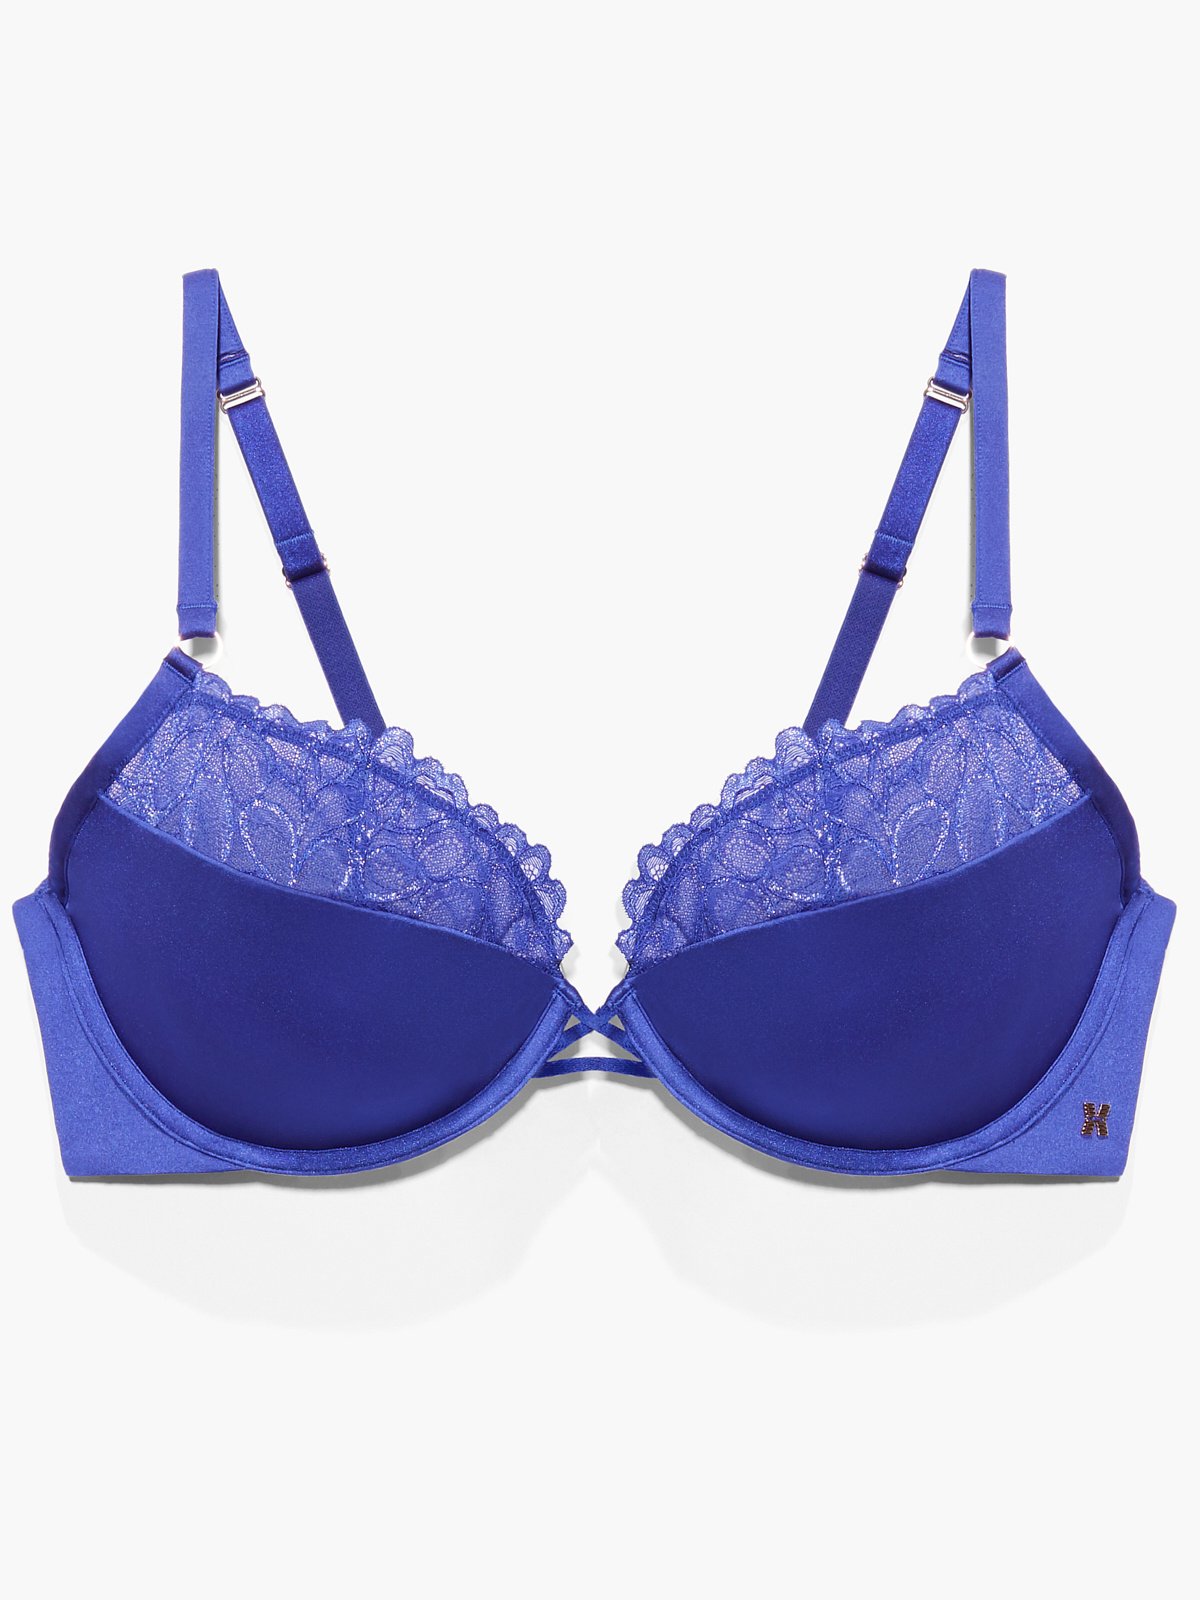 https://cdn.savagex.com/media/images/products/BA2042978-3821/SAVAGE-NOT-SORRY-HALF-CUP-BRA-WITH-LACE-BA2042978-3821-LAYDOWN-1200x1600.jpg